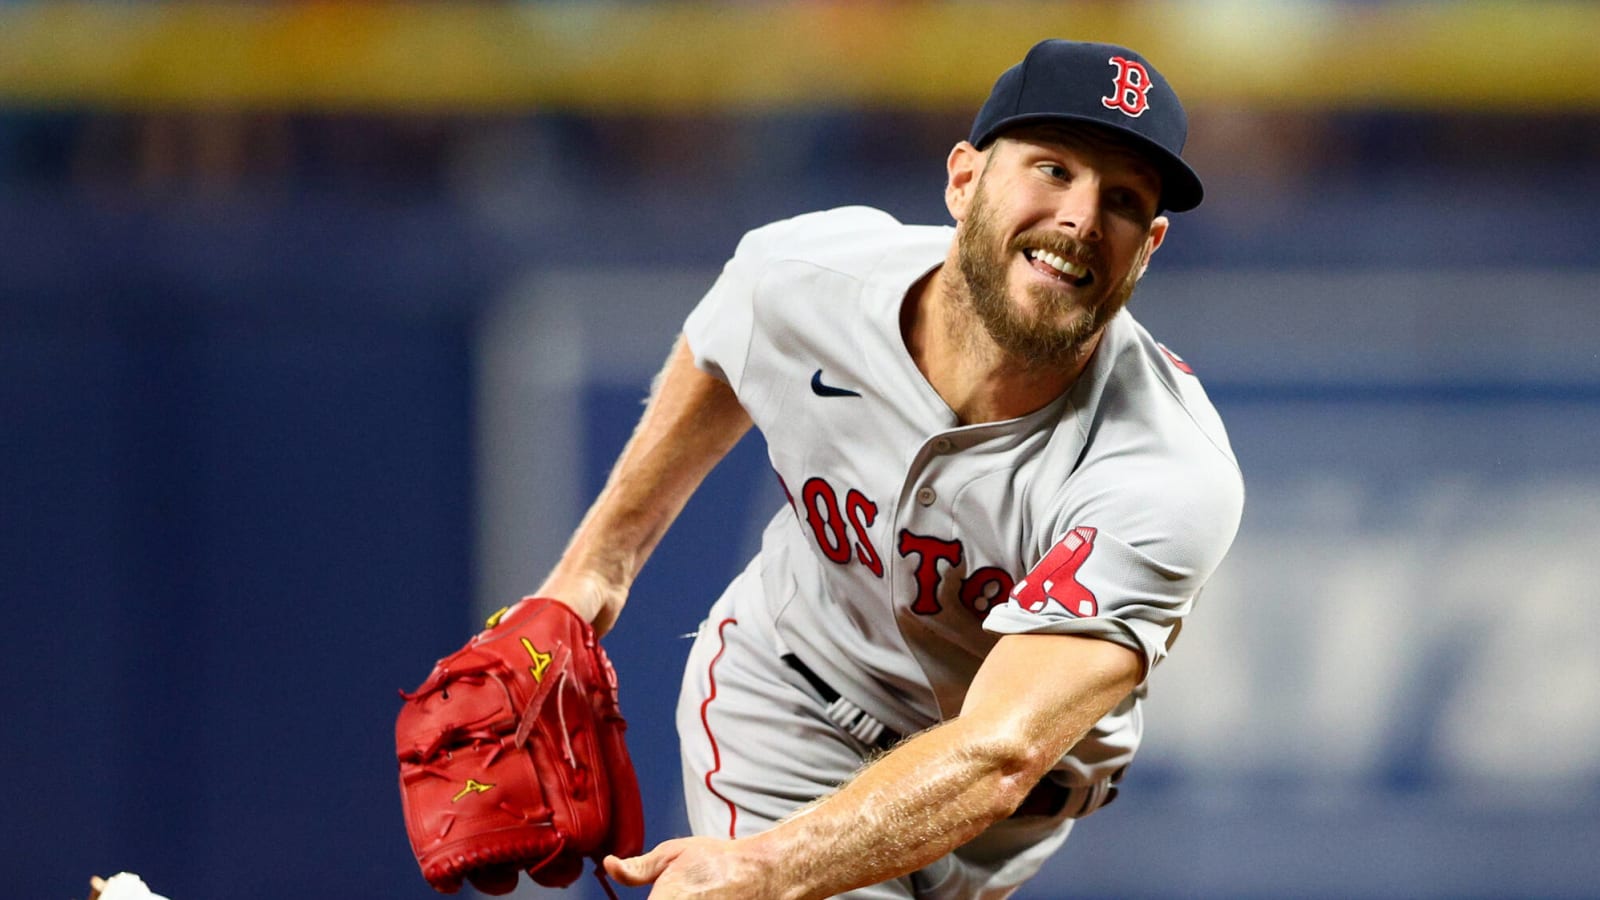 Boston Red Sox Nation: Here's the Scoop